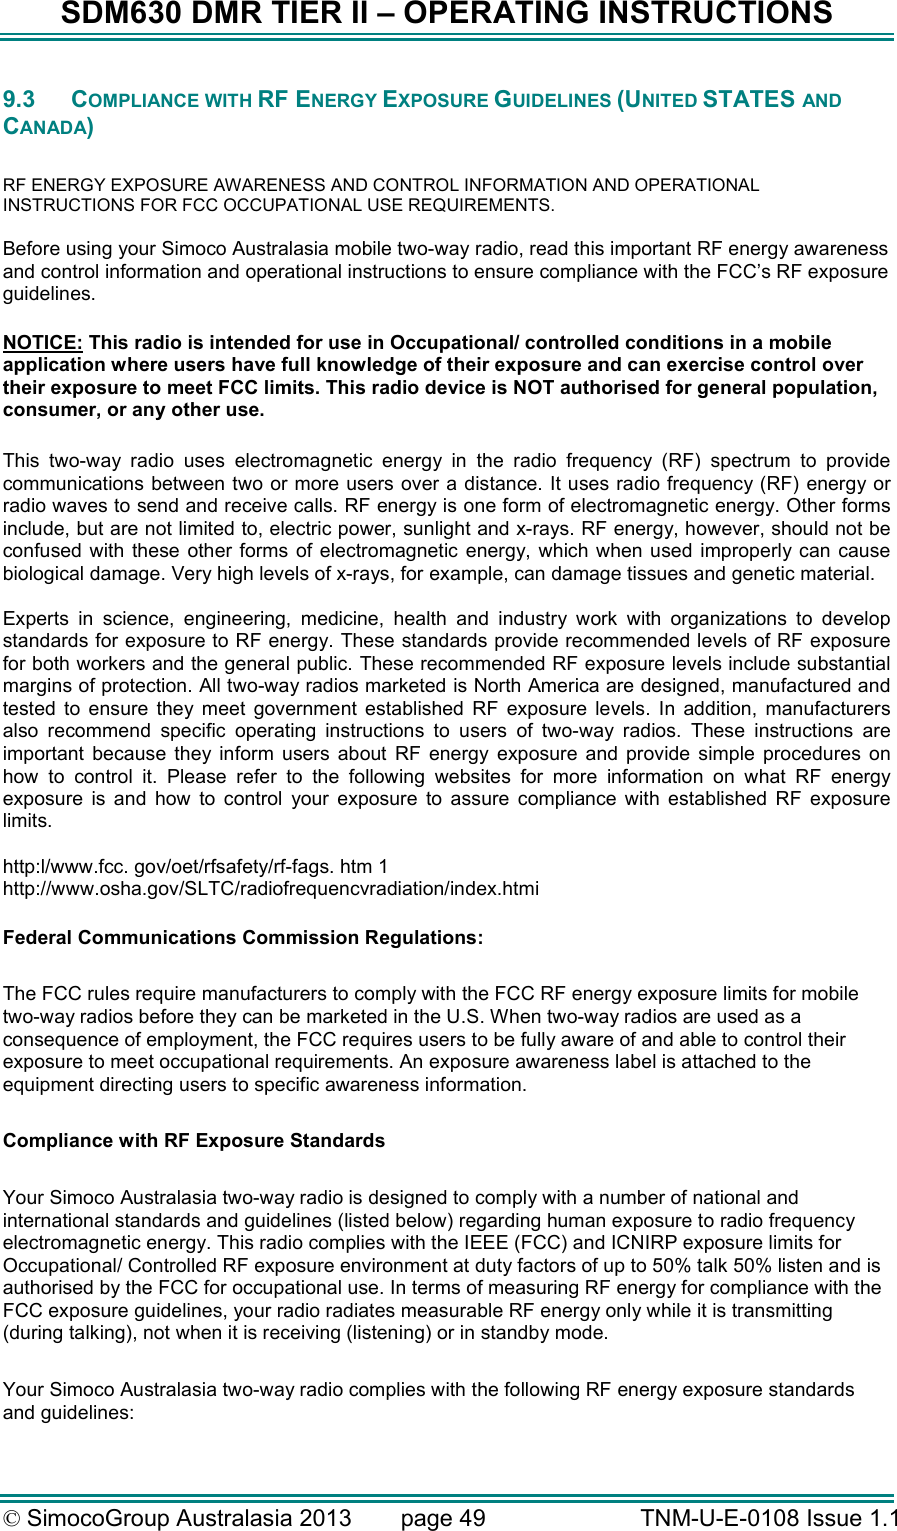 SDM630 DMR TIER II – OPERATING INSTRUCTIONS © SimocoGroup Australasia 2013   page 49   TNM-U-E-0108 Issue 1.1 9.3  COMPLIANCE WITH RF ENERGY EXPOSURE GUIDELINES (UNITED STATES AND CANADA)  RF ENERGY EXPOSURE AWARENESS AND CONTROL INFORMATION AND OPERATIONAL INSTRUCTIONS FOR FCC OCCUPATIONAL USE REQUIREMENTS. Before using your Simoco Australasia mobile two-way radio, read this important RF energy awareness and control information and operational instructions to ensure compliance with the FCC’s RF exposure guidelines.  NOTICE: This radio is intended for use in Occupational/ controlled conditions in a mobile application where users have full knowledge of their exposure and can exercise control over their exposure to meet FCC limits. This radio device is NOT authorised for general population, consumer, or any other use.  This  two-way  radio  uses  electromagnetic  energy  in  the  radio  frequency  (RF)  spectrum  to  provide communications between two or more users over a distance. It uses radio frequency (RF)  energy or radio waves to send and receive calls. RF energy is one form of electromagnetic energy. Other forms include, but are not limited to, electric power, sunlight and x-rays. RF energy, however, should not be confused  with  these other forms  of electromagnetic  energy, which  when used improperly can  cause biological damage. Very high levels of x-rays, for example, can damage tissues and genetic material.  Experts  in  science,  engineering,  medicine,  health  and  industry  work  with  organizations  to  develop standards for exposure to RF energy. These standards provide recommended levels of RF exposure for both workers and the general public. These recommended RF exposure levels include substantial margins of protection. All two-way radios marketed is North America are designed, manufactured and tested  to  ensure  they  meet  government  established  RF  exposure  levels.  In  addition,  manufacturers also  recommend  specific  operating  instructions  to  users  of  two-way  radios.  These  instructions  are important  because  they  inform  users  about  RF  energy  exposure  and  provide  simple  procedures  on how  to  control  it.  Please  refer  to  the  following  websites  for  more  information  on  what  RF  energy exposure  is  and  how  to  control  your  exposure  to  assure  compliance  with  established  RF  exposure limits.  http:l/www.fcc. gov/oet/rfsafety/rf-fags. htm 1  http://www.osha.gov/SLTC/radiofrequencvradiation/index.htmi  Federal Communications Commission Regulations:  The FCC rules require manufacturers to comply with the FCC RF energy exposure limits for mobile two-way radios before they can be marketed in the U.S. When two-way radios are used as a consequence of employment, the FCC requires users to be fully aware of and able to control their exposure to meet occupational requirements. An exposure awareness label is attached to the equipment directing users to specific awareness information.  Compliance with RF Exposure Standards  Your Simoco Australasia two-way radio is designed to comply with a number of national and international standards and guidelines (listed below) regarding human exposure to radio frequency electromagnetic energy. This radio complies with the IEEE (FCC) and ICNIRP exposure limits for Occupational/ Controlled RF exposure environment at duty factors of up to 50% talk 50% listen and is authorised by the FCC for occupational use. In terms of measuring RF energy for compliance with the FCC exposure guidelines, your radio radiates measurable RF energy only while it is transmitting (during talking), not when it is receiving (listening) or in standby mode.   Your Simoco Australasia two-way radio complies with the following RF energy exposure standards and guidelines: 